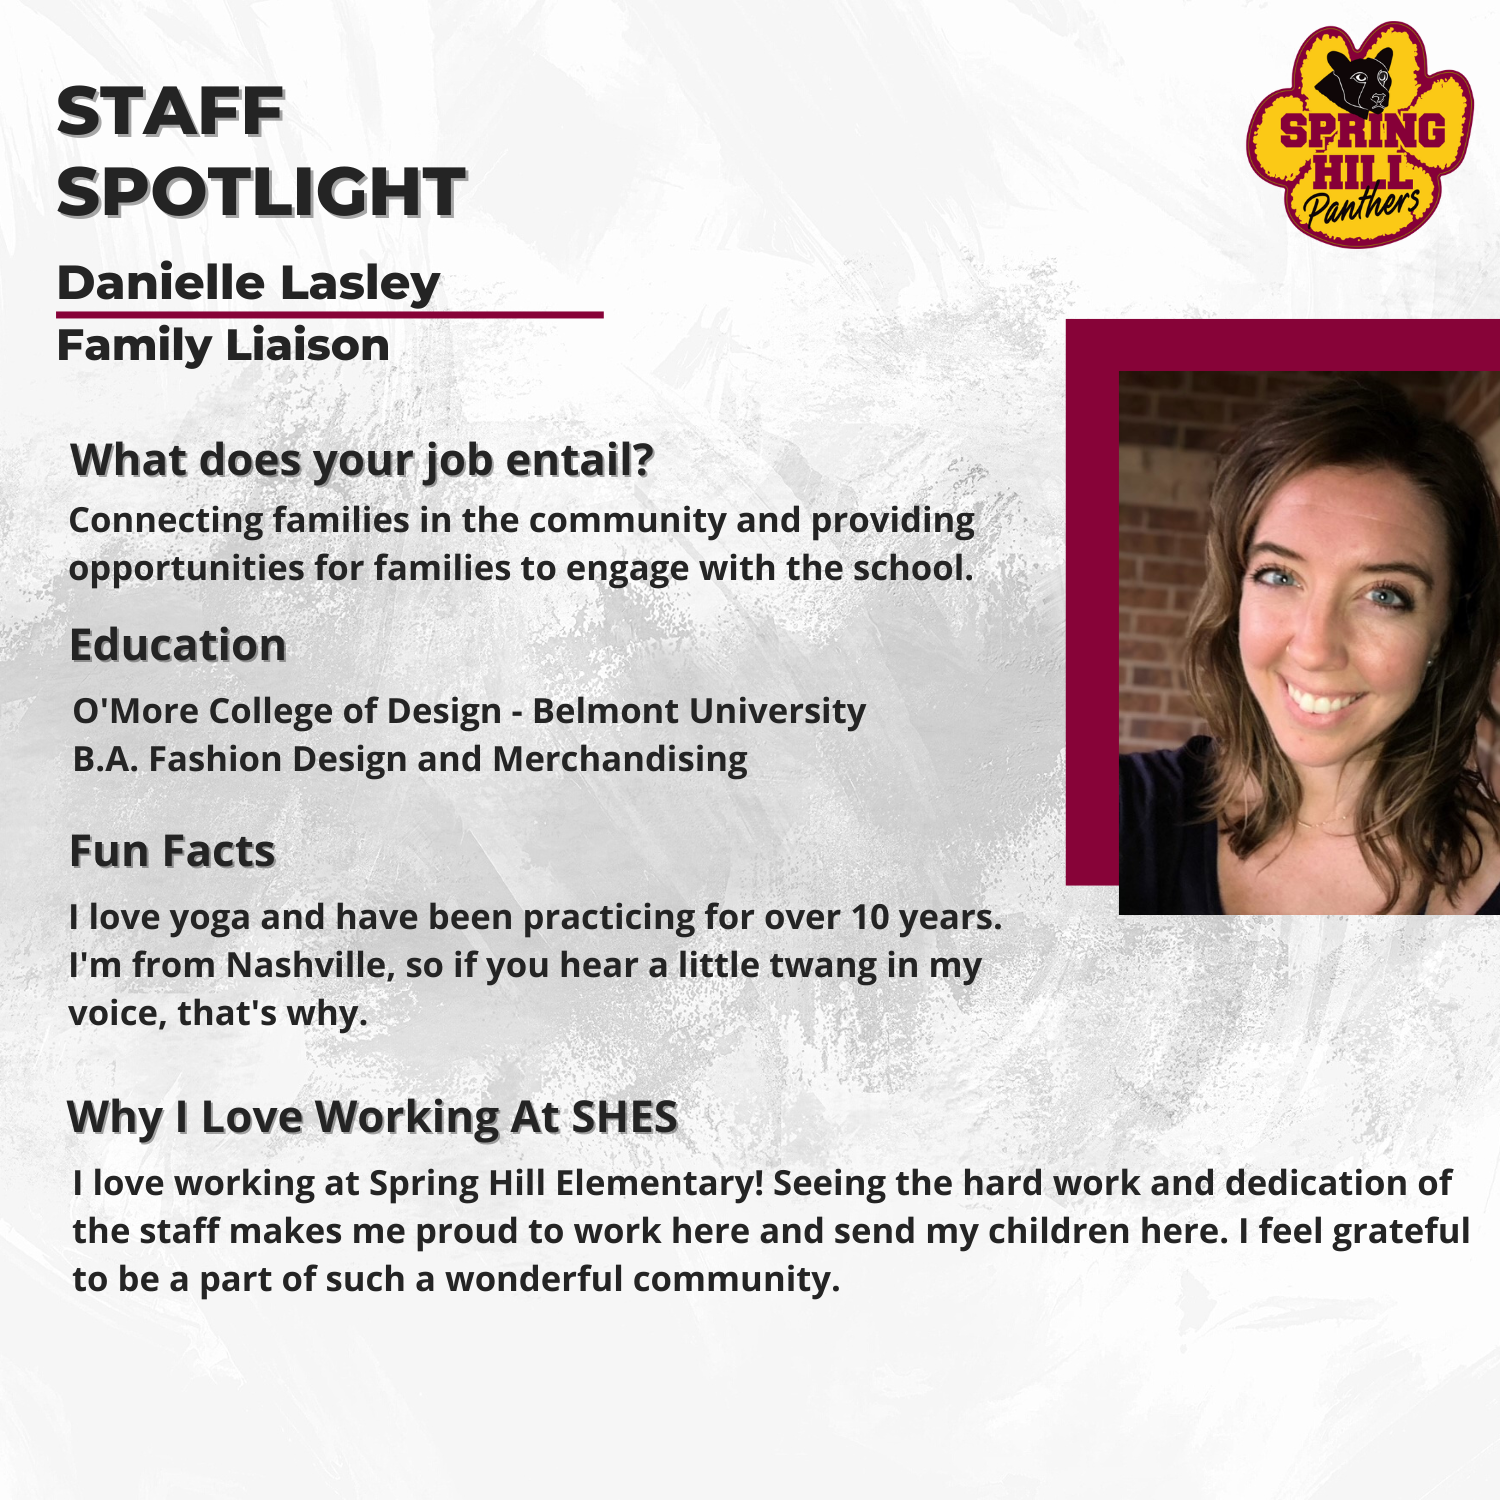 Danielle Lasley; Family Liaison- Connecting families in the community and providing opportunities for families to engage with the school; O'More College of Design- Belmont University- B.A. Fashion Design and Merchandising; I love yoga and have been practicing for over 10 years. I'm from Nashville, so if you hear a little twang in my voice, that's why. I love working at Spring Hill Elementary! Seeing the hard work and dedication of the staff makes me proud to work here and send my children here. I feel grateful to be a part of such a wonderful community. 